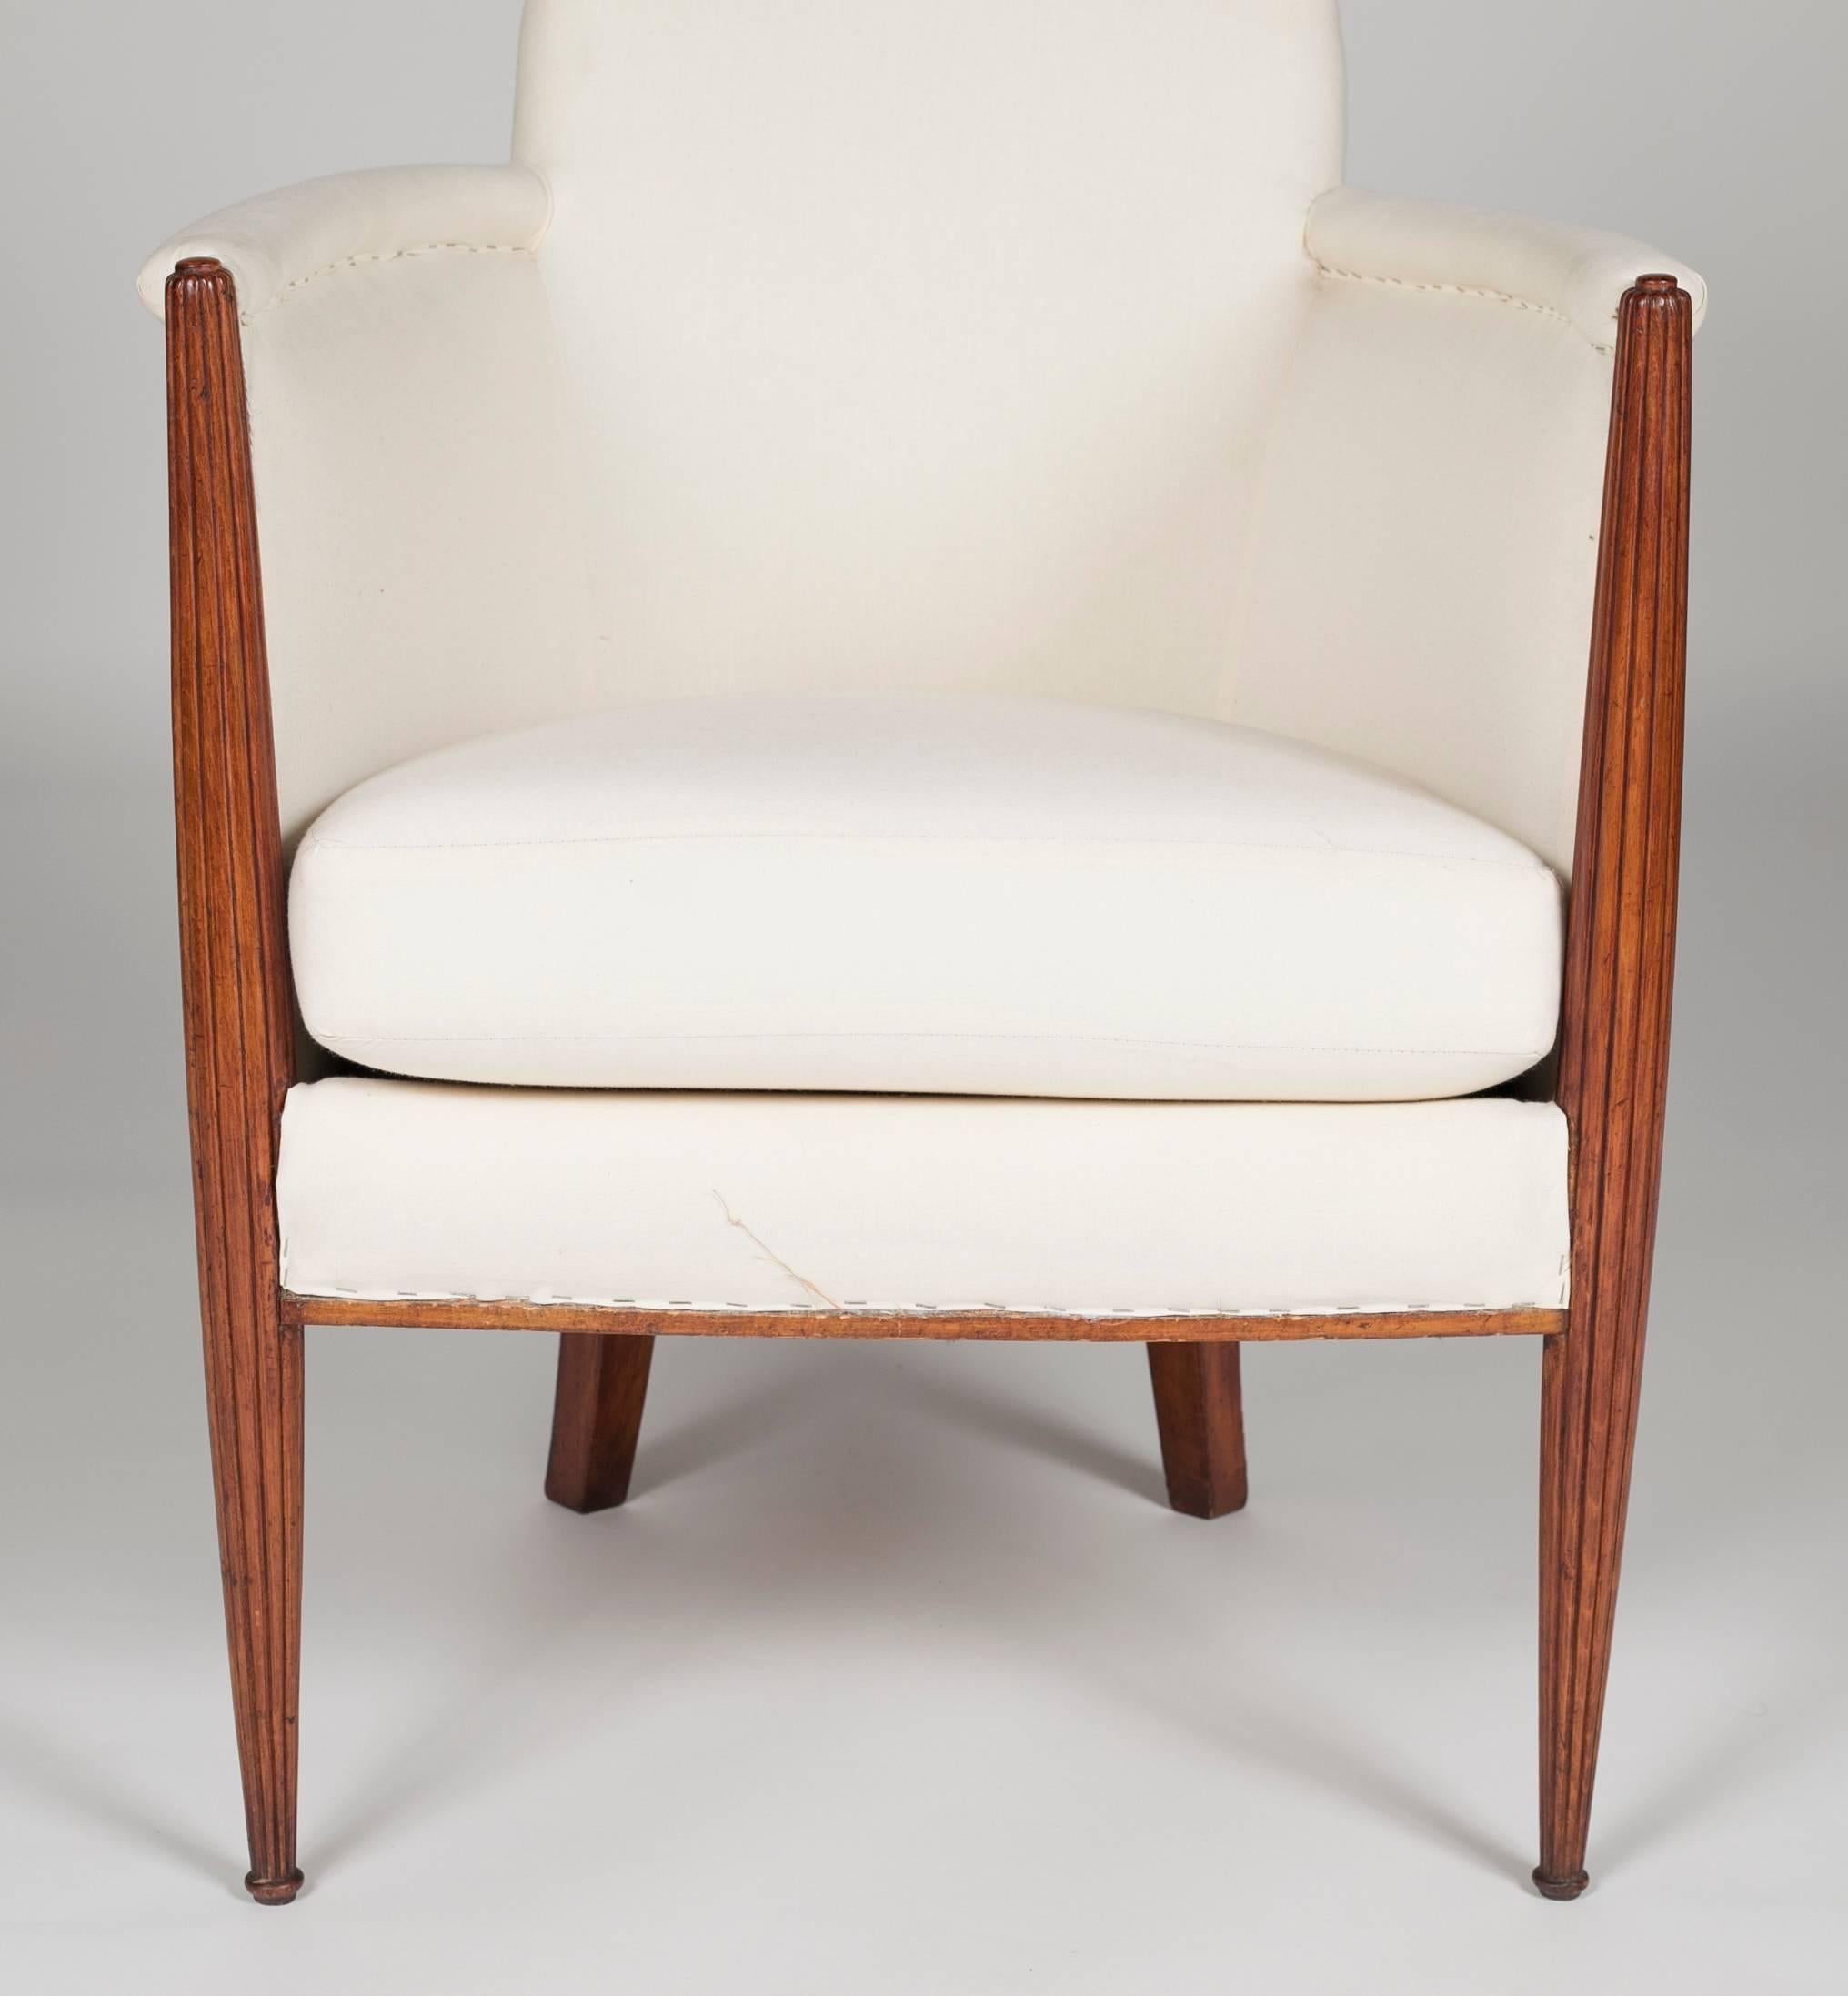 20th Century French Art Deco Reeded Armchair